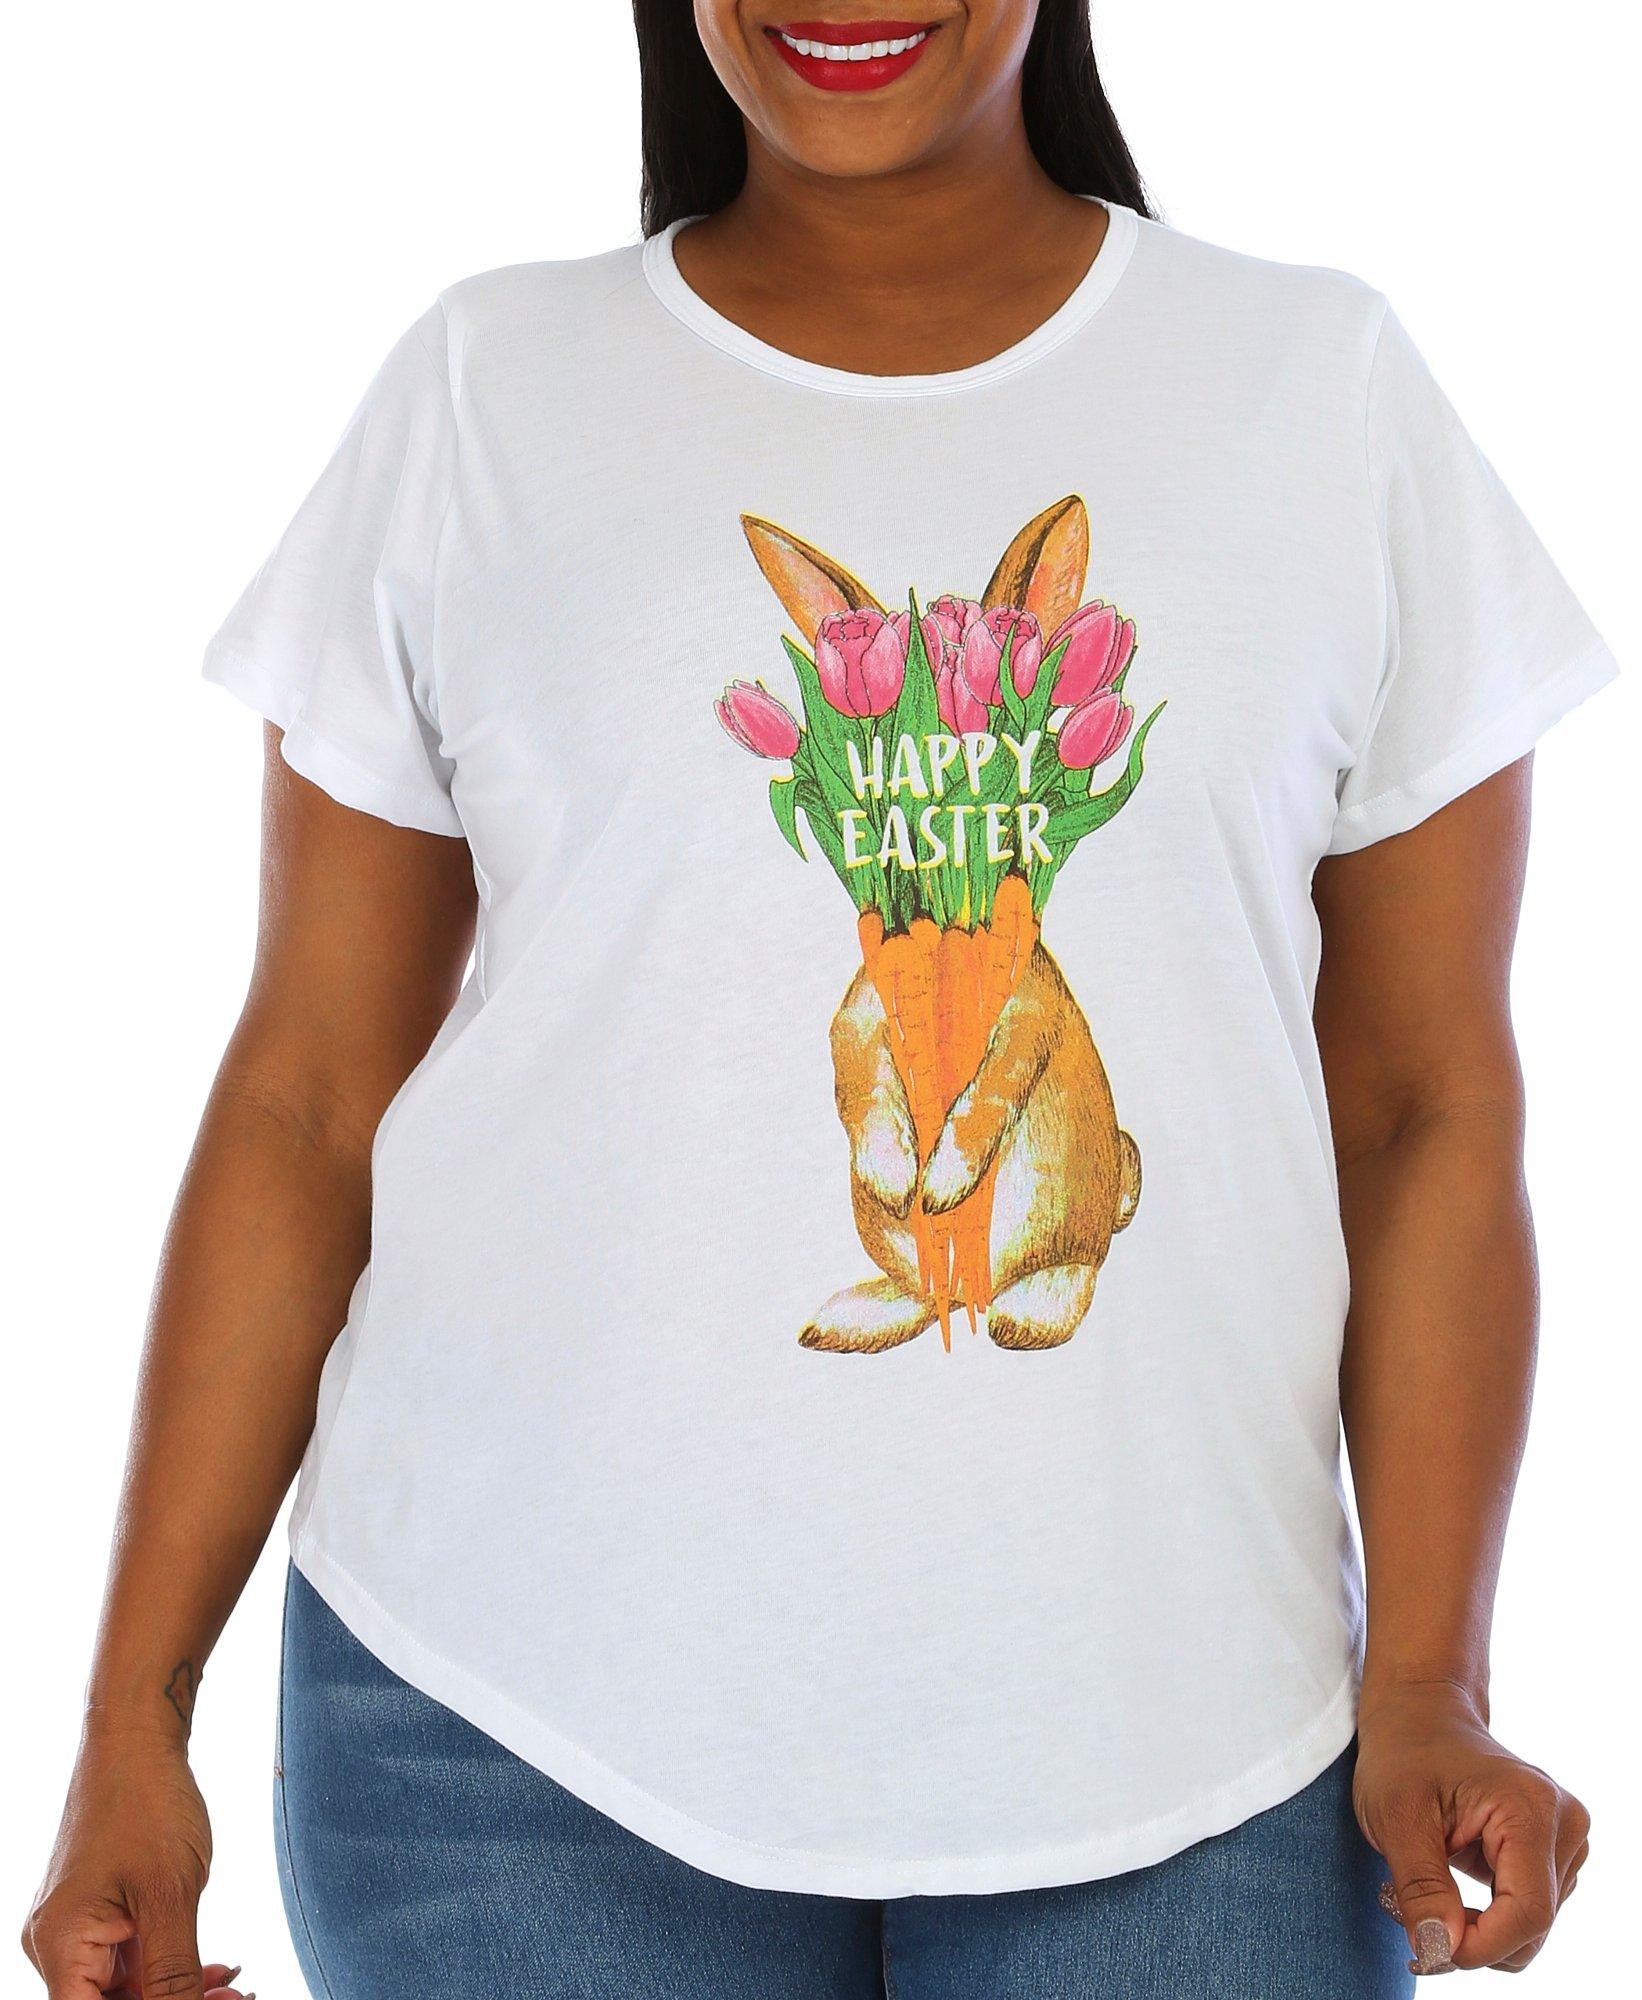 Plus Happy Easter Tulips Short Sleeve T-Shirt